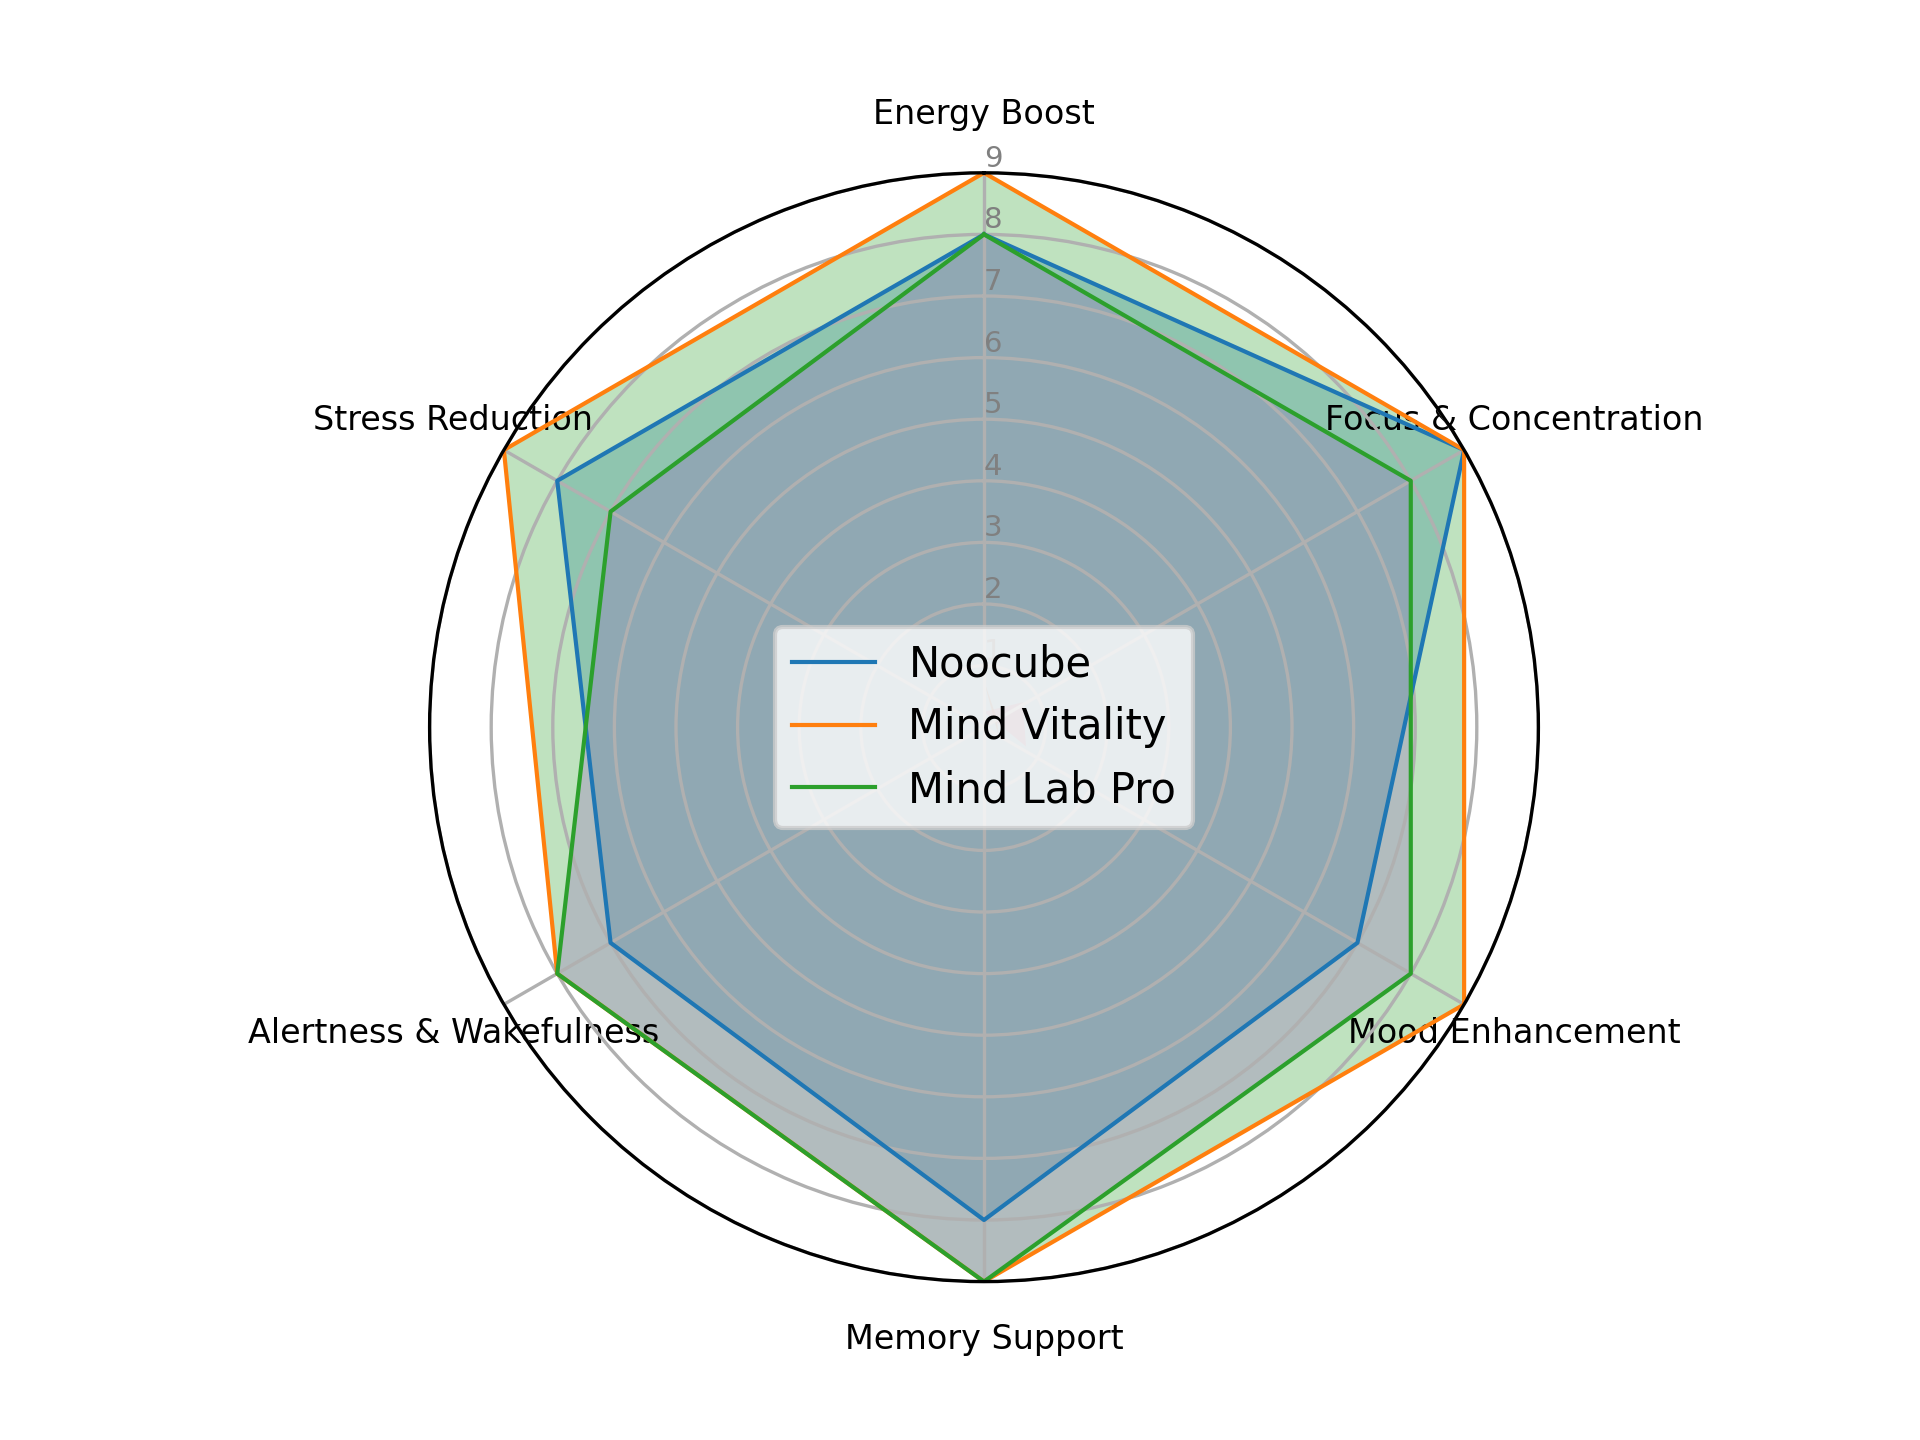 A comparison of the befits of each of the three main products, Mind Lab Pro V Mind Vilaity V Noocube (authors rating).